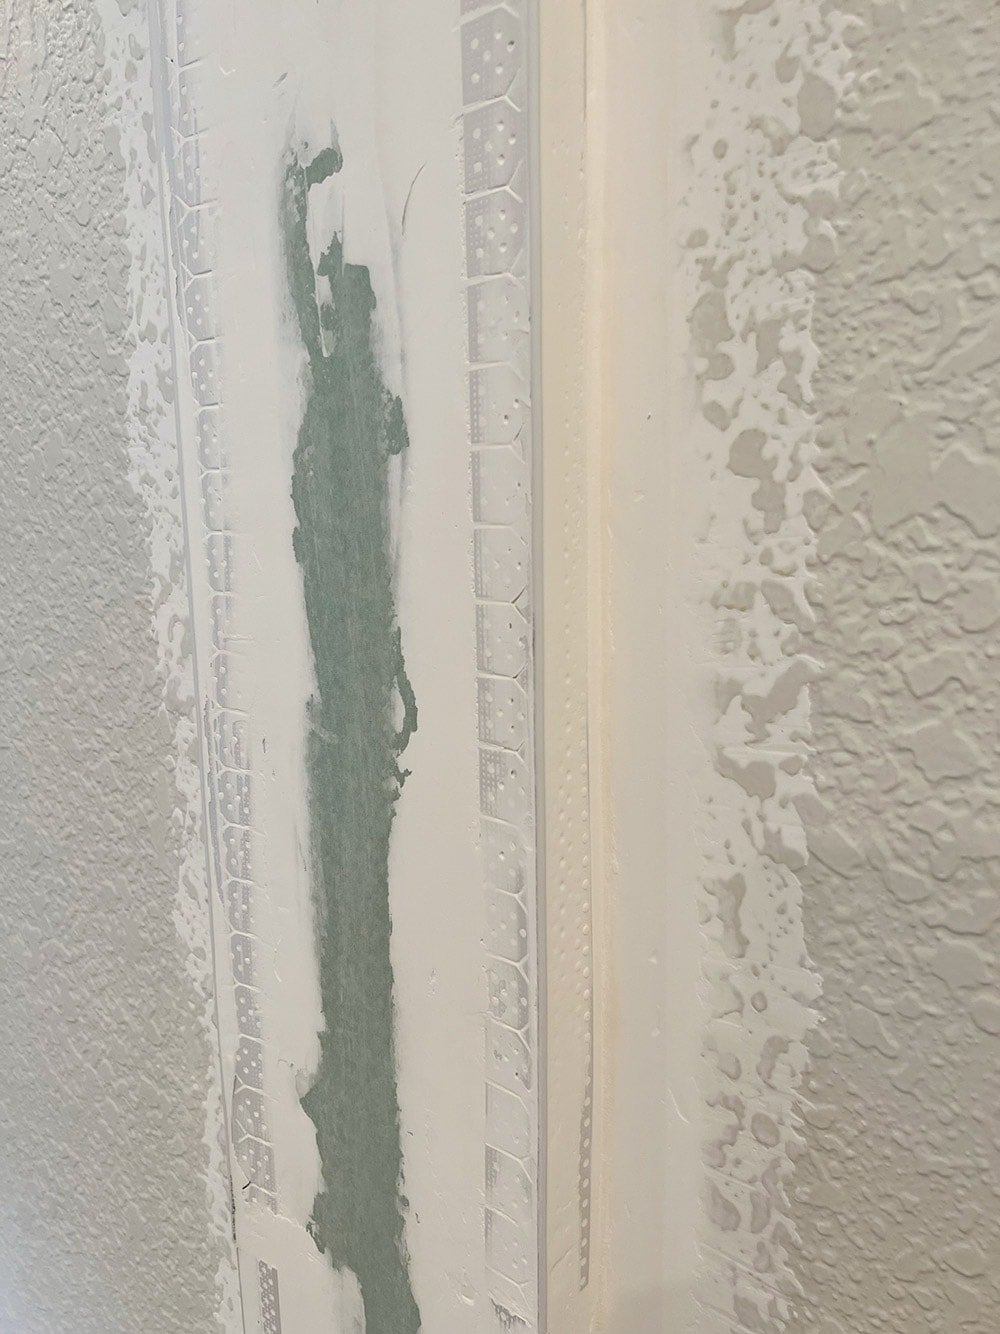 installing joint tape and corner bead for diy drywall arches